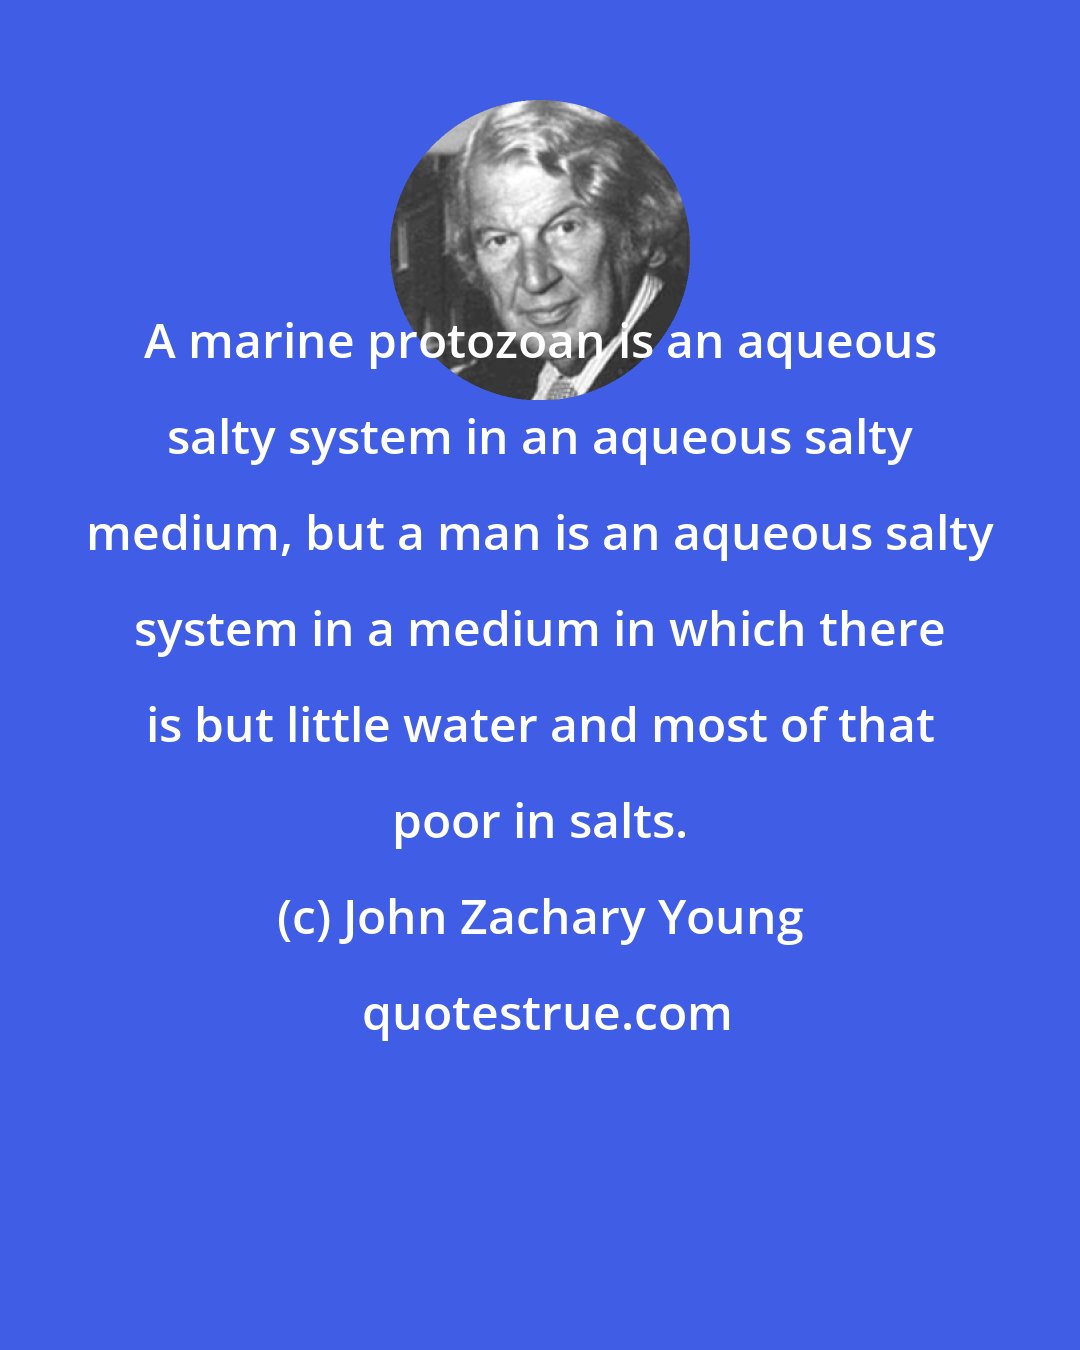 John Zachary Young: A marine protozoan is an aqueous salty system in an aqueous salty medium, but a man is an aqueous salty system in a medium in which there is but little water and most of that poor in salts.